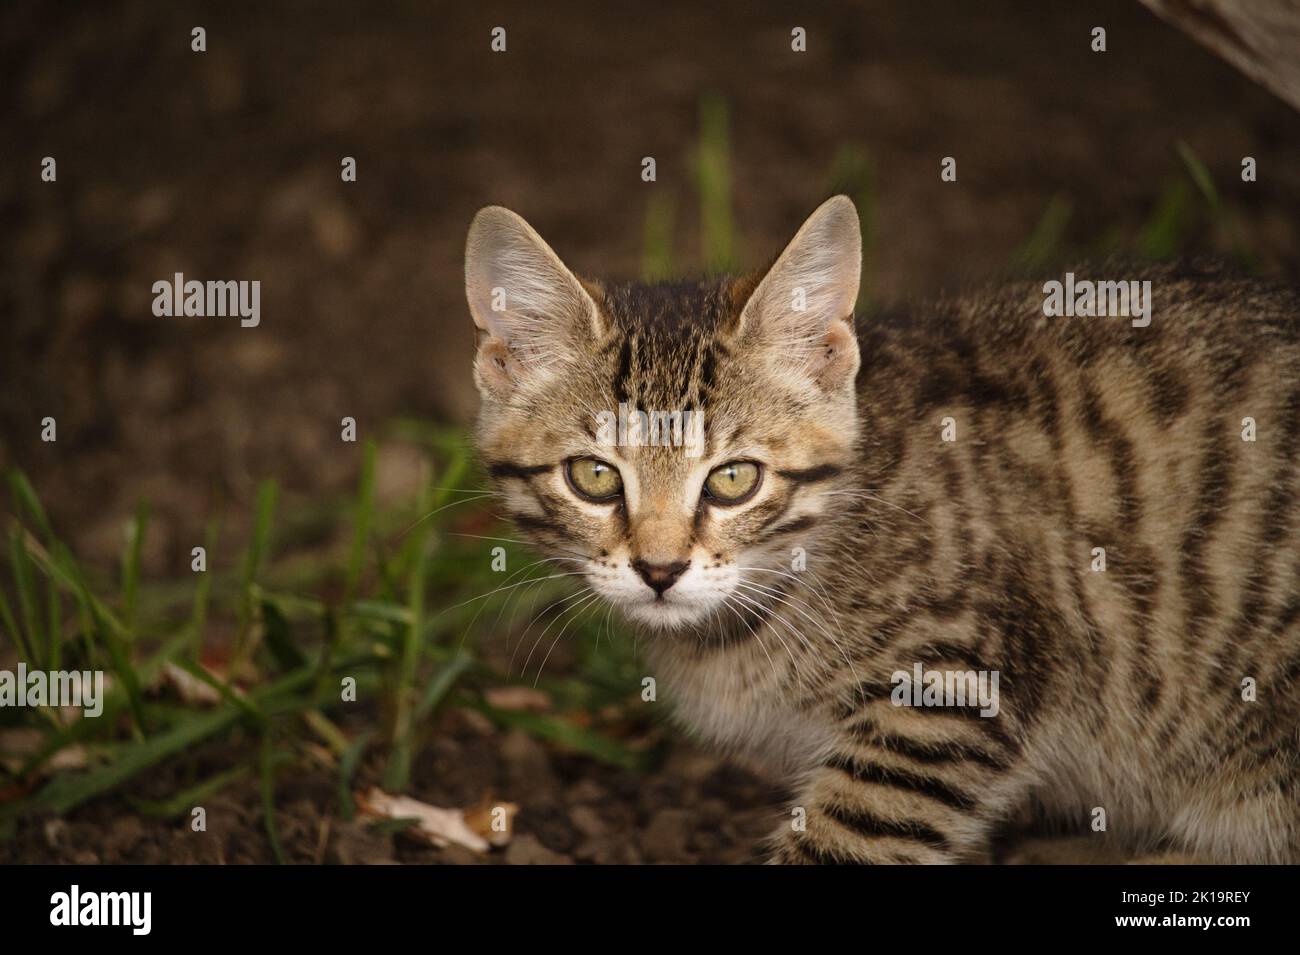 An outdoor kitten (brown tabby) on a farmhouse property. Stock Photo